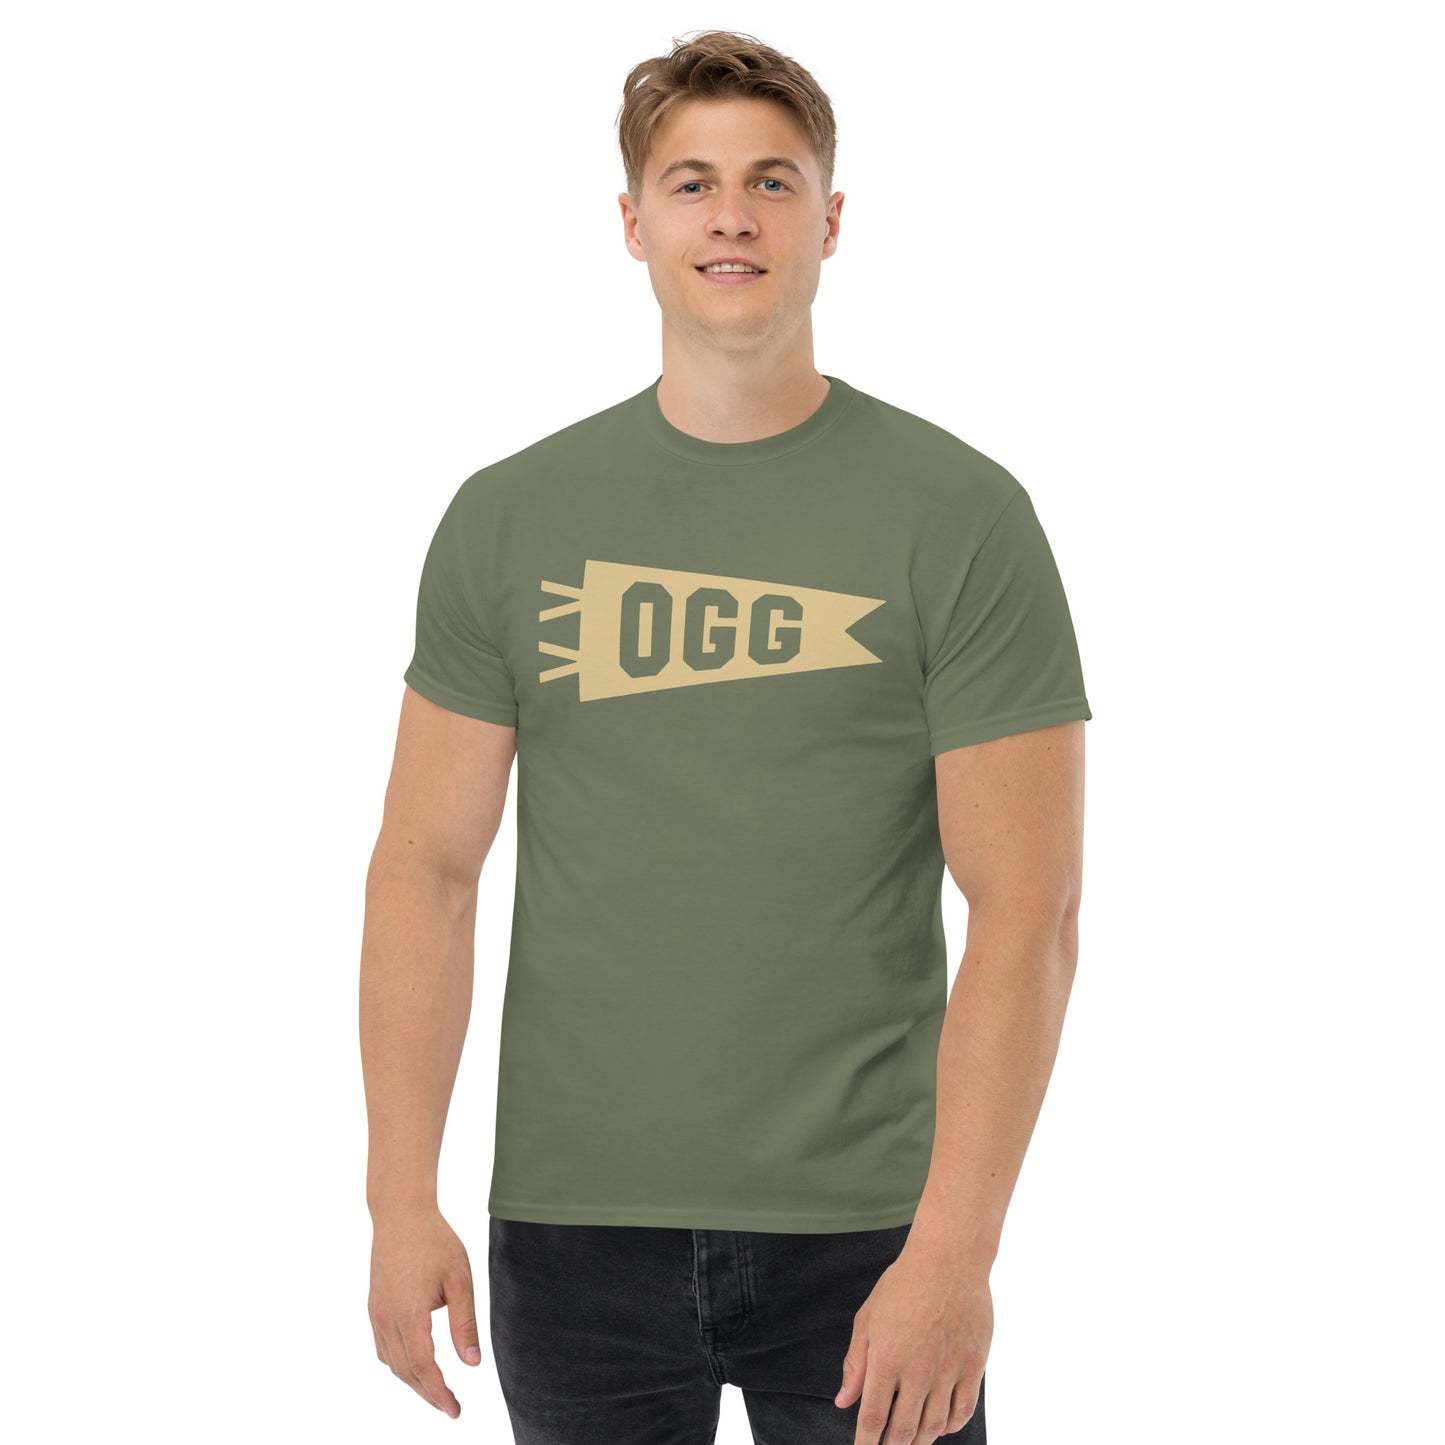 Airport Code Men's T-Shirt - Brown Graphic • OGG Maui • YHM Designs - Image 03